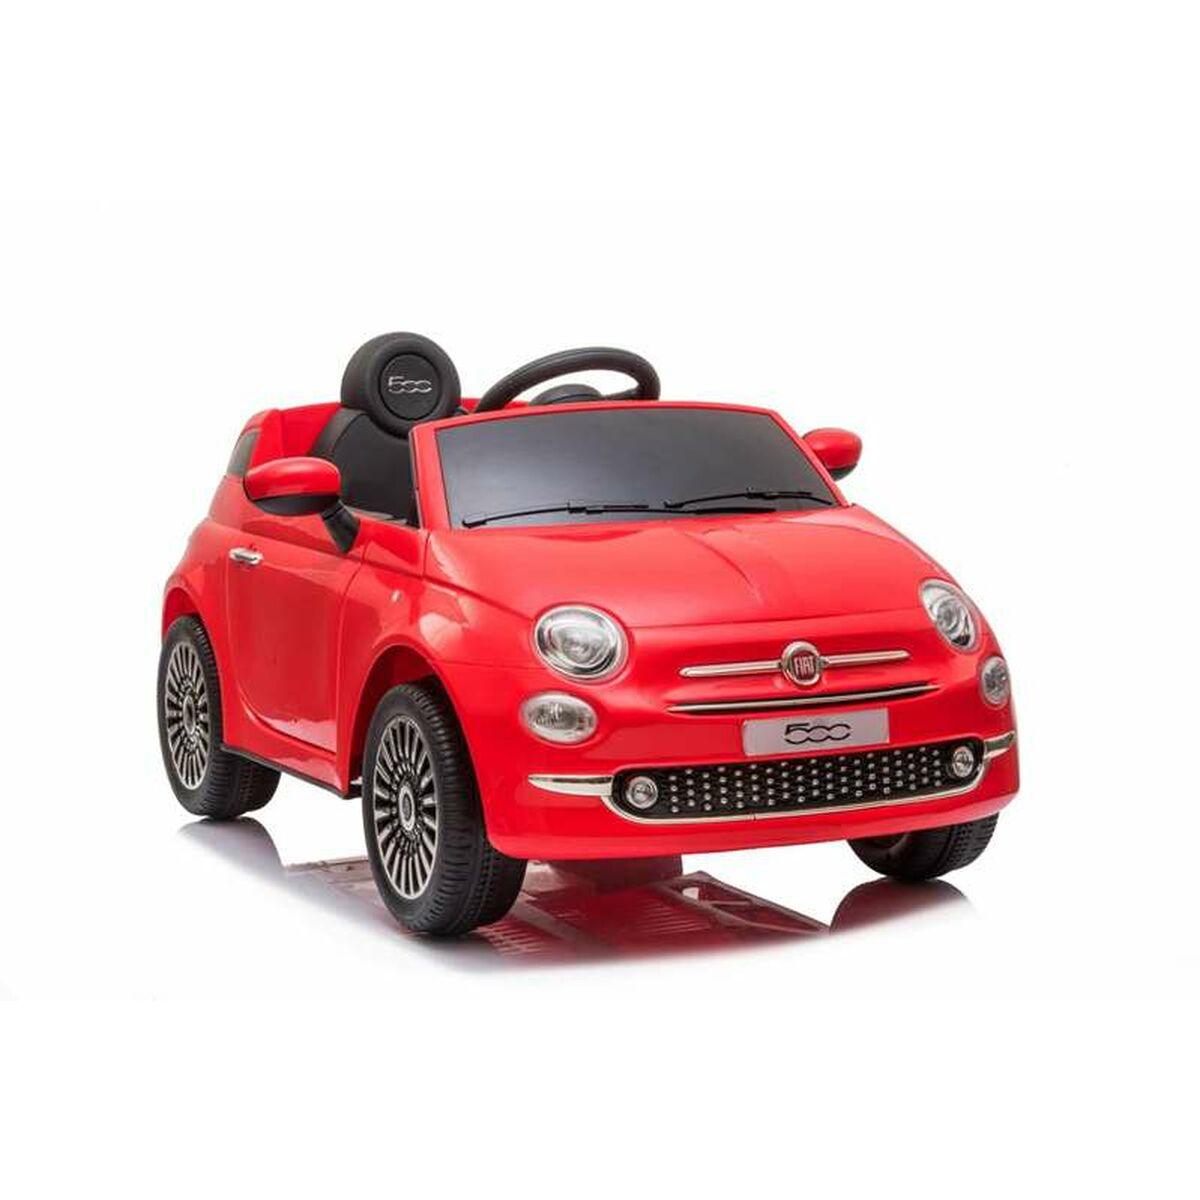 Children's Electric Car Injusa Fiat 500 Red Radio control 12 V - VirtuousWares:Global